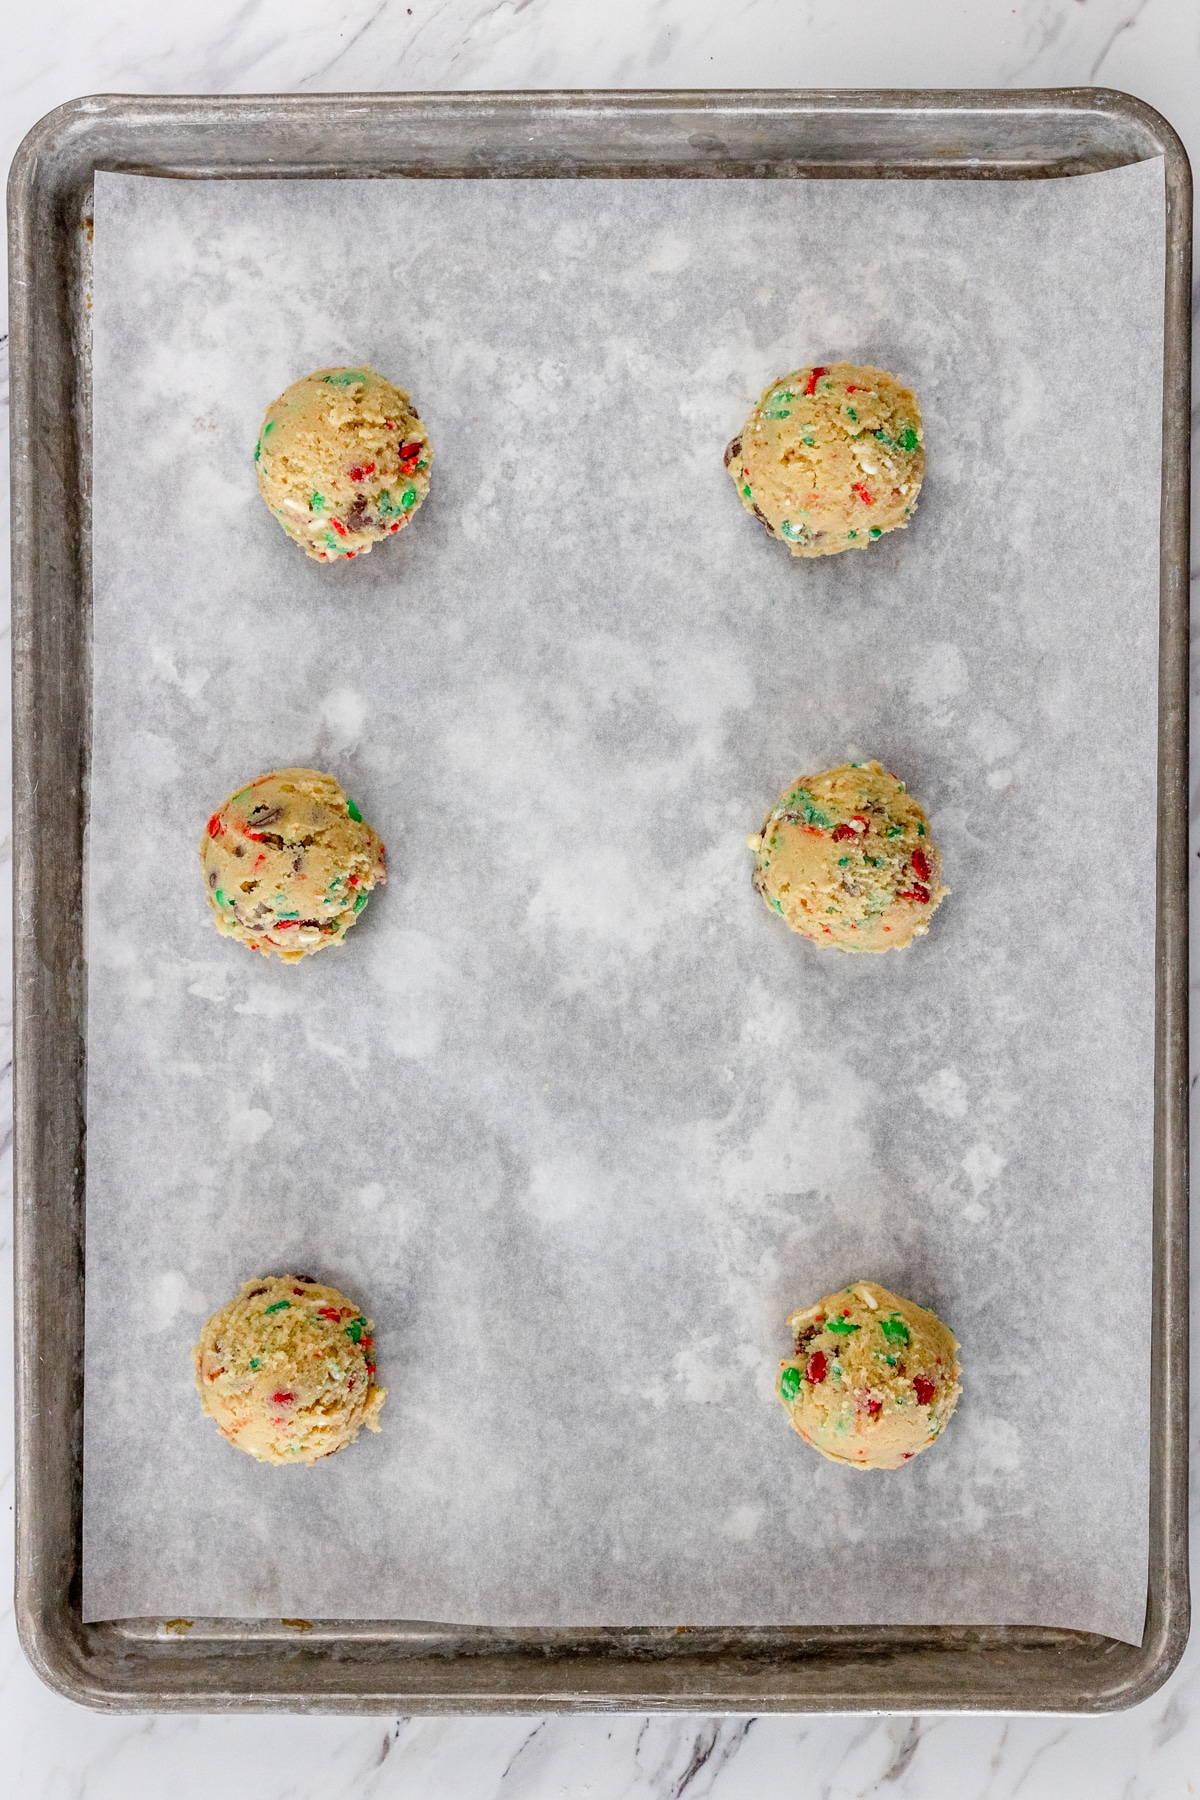 Top view of baking tray lined with parchment paper with cookie dough balls on it.